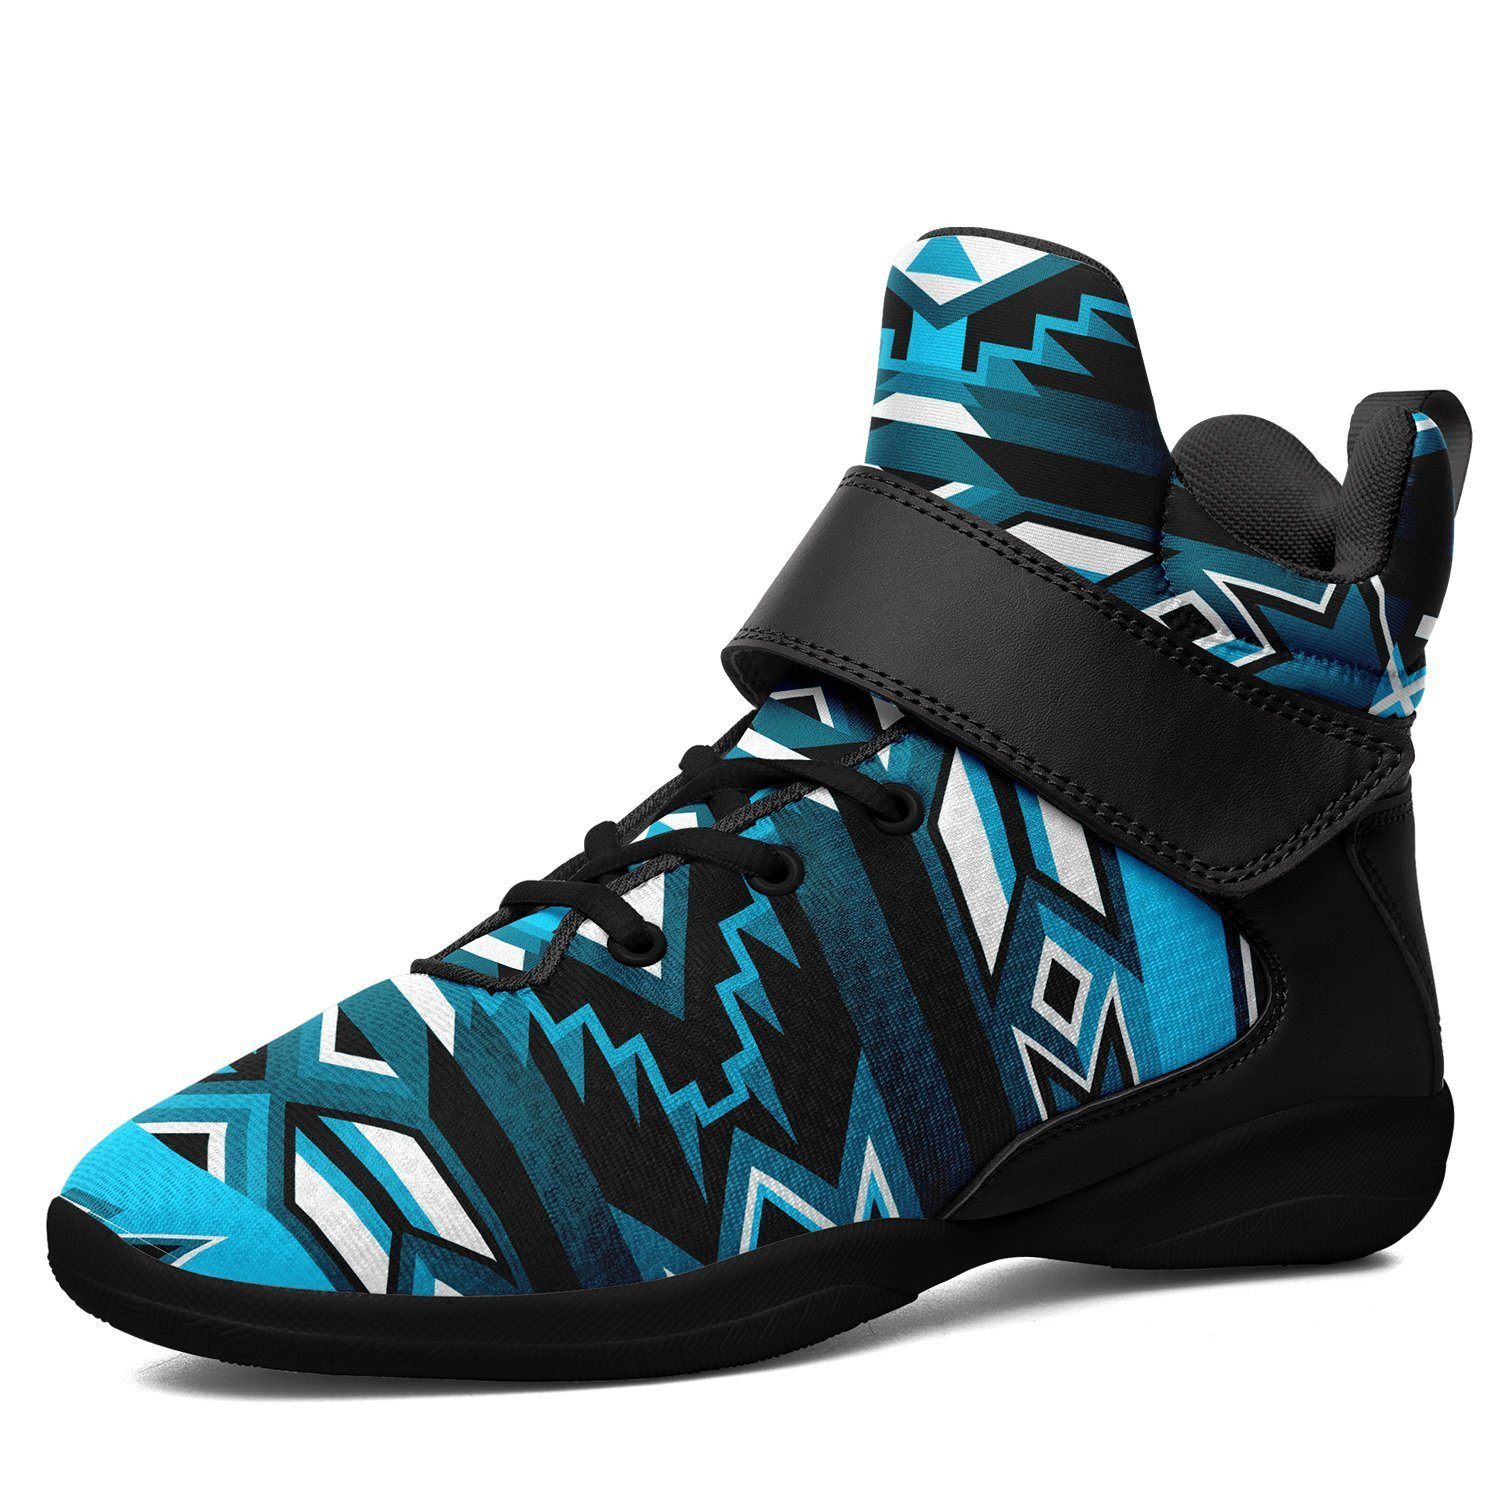 Northern Journey Ipottaa Basketball / Sport High Top Shoes - Black Sole 49 Dzine US Men 7 / EUR 40 Black Sole with Black Strap 